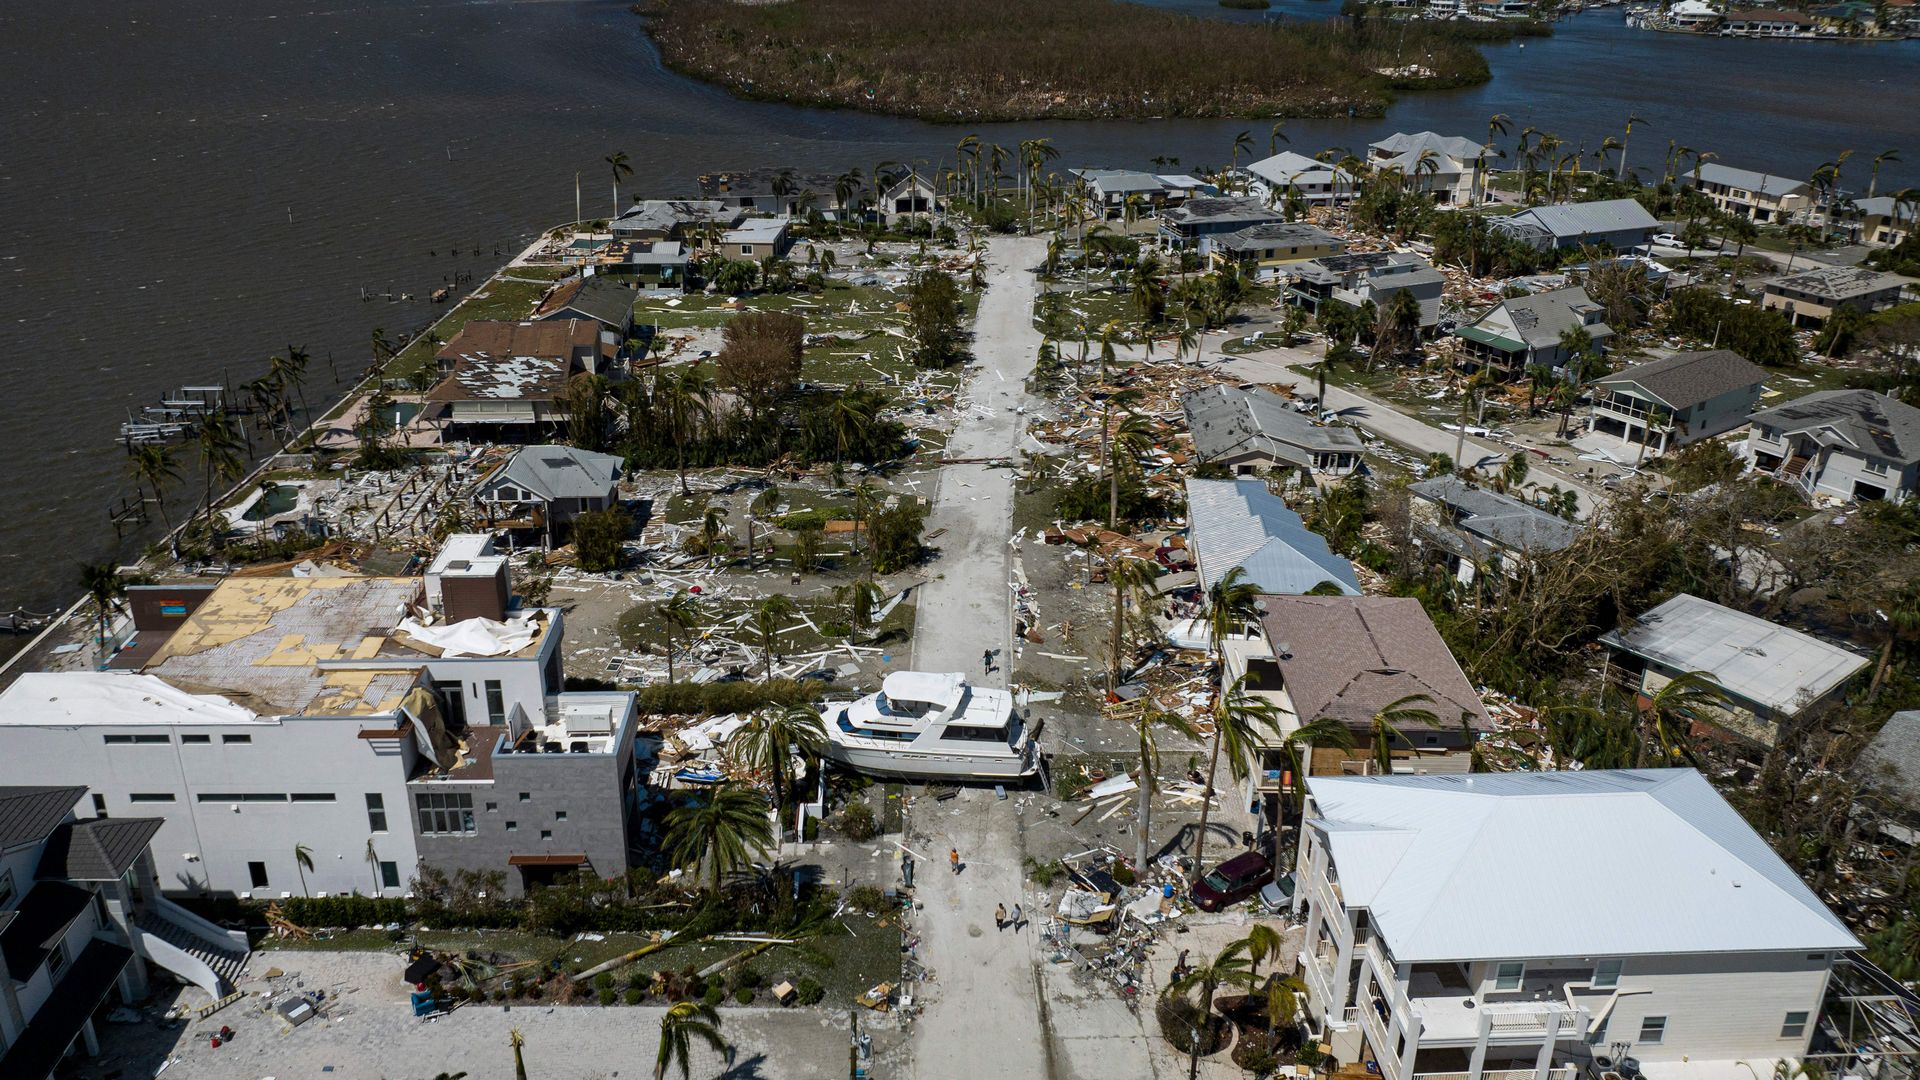 An aerial picture taken on September 29, 2022 shows a big washed up boat sitting in the middle of a street in the aftermath of Hurricane Ian in Fort Myers, Florida.